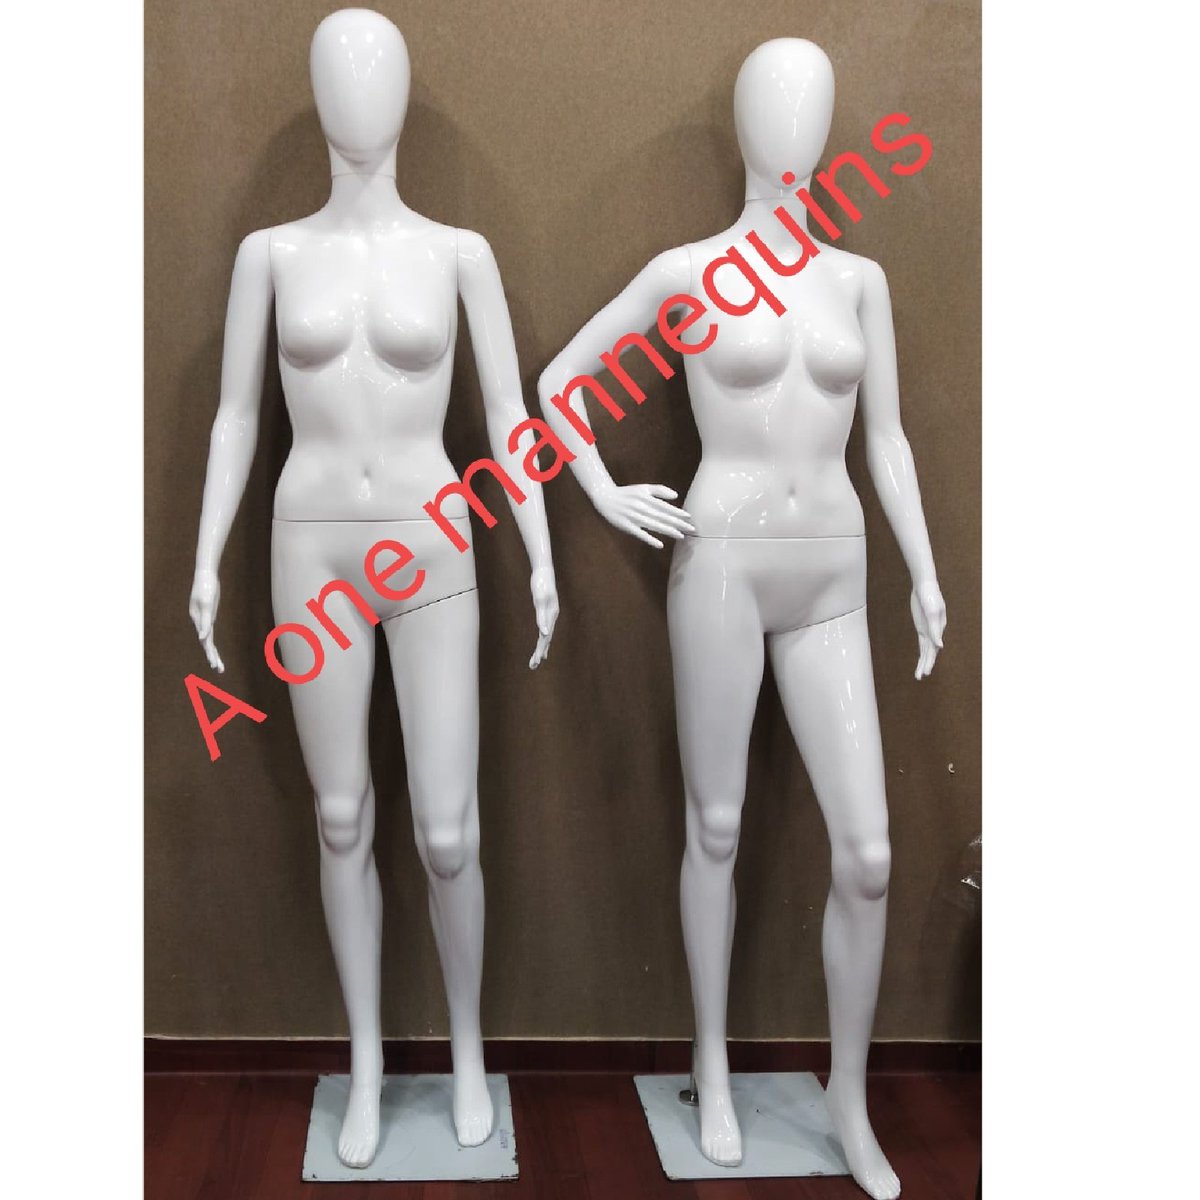 Product: Glossy mannequins
Call/WhatsApp:9081042900/500
#modèles #stylisme #modelfrance #defiledemode #agencemannequin #manequin #mannequinhomme #modelephoto #mannequinat #mannequinfemme